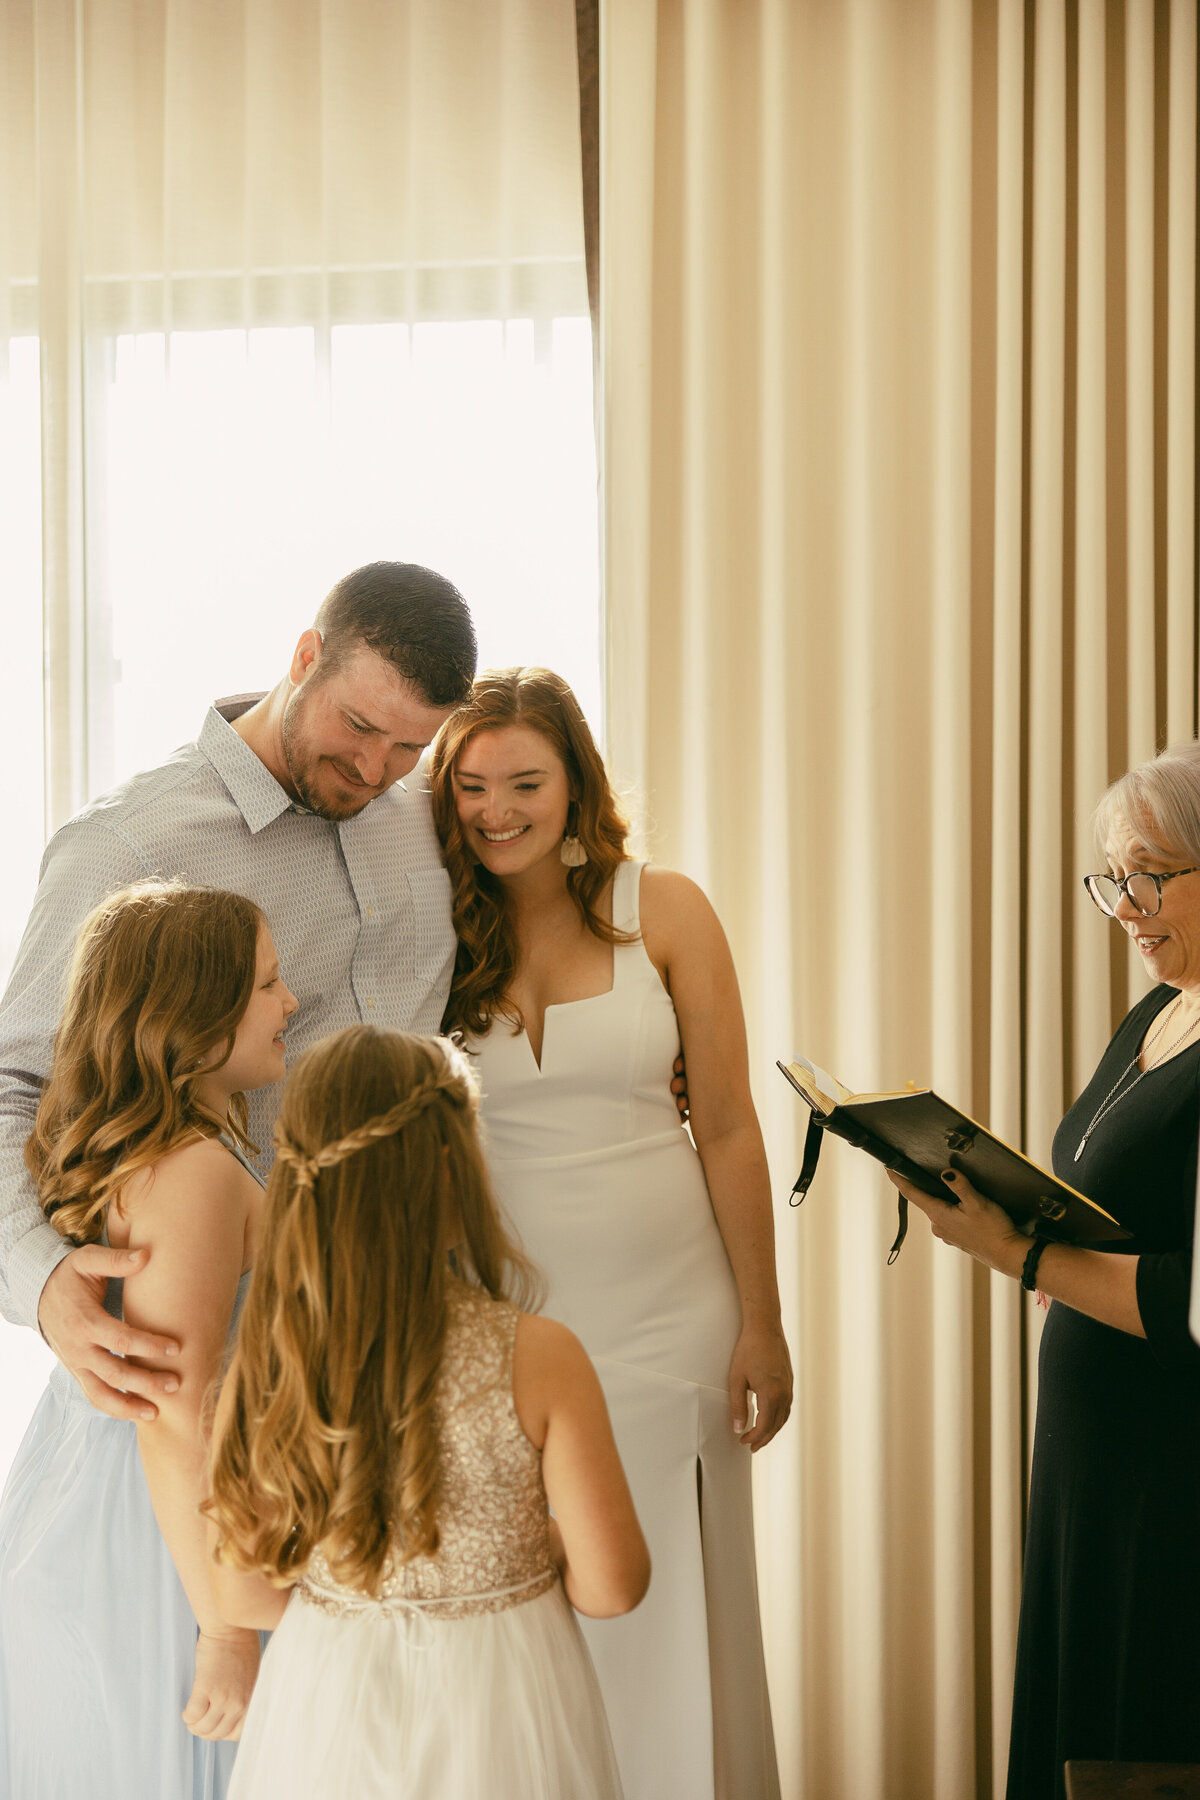 A wedding couple standing together with two girls in front of an officiant.